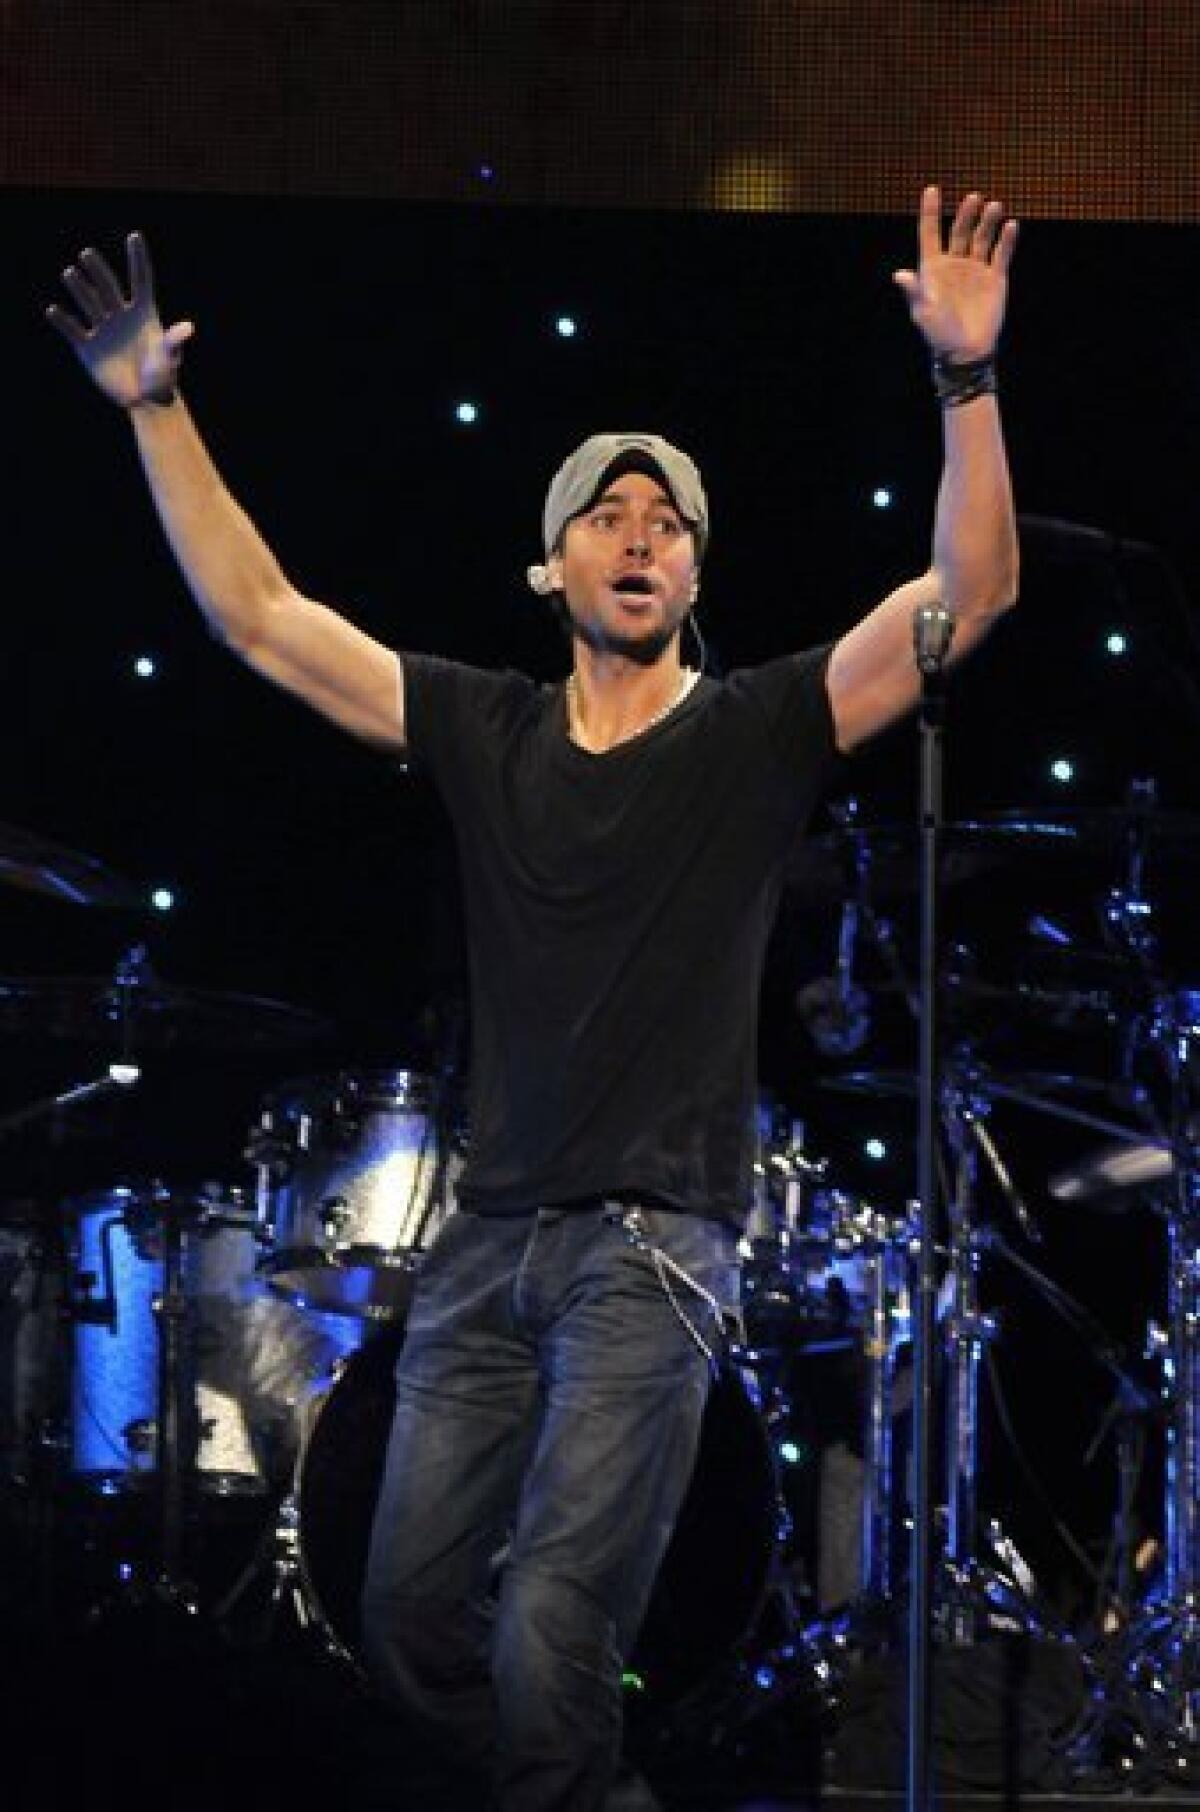 Vancouver Idol: Critics divided on the singing ability of Enrique Iglesias